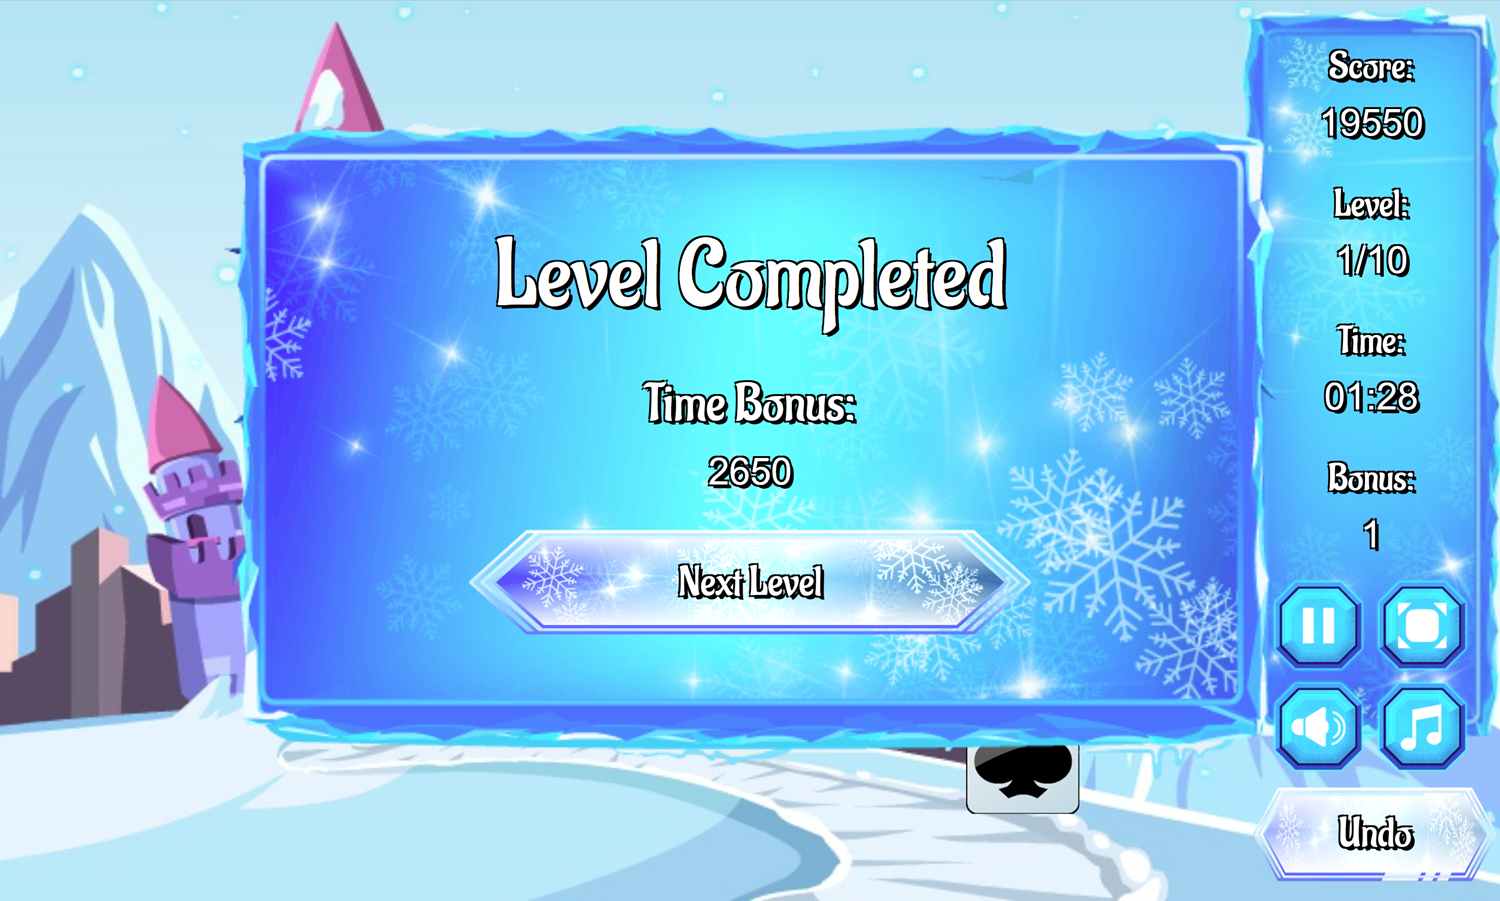 Frozen Castle Solitaire Game Level Completed Screen Screenshot.